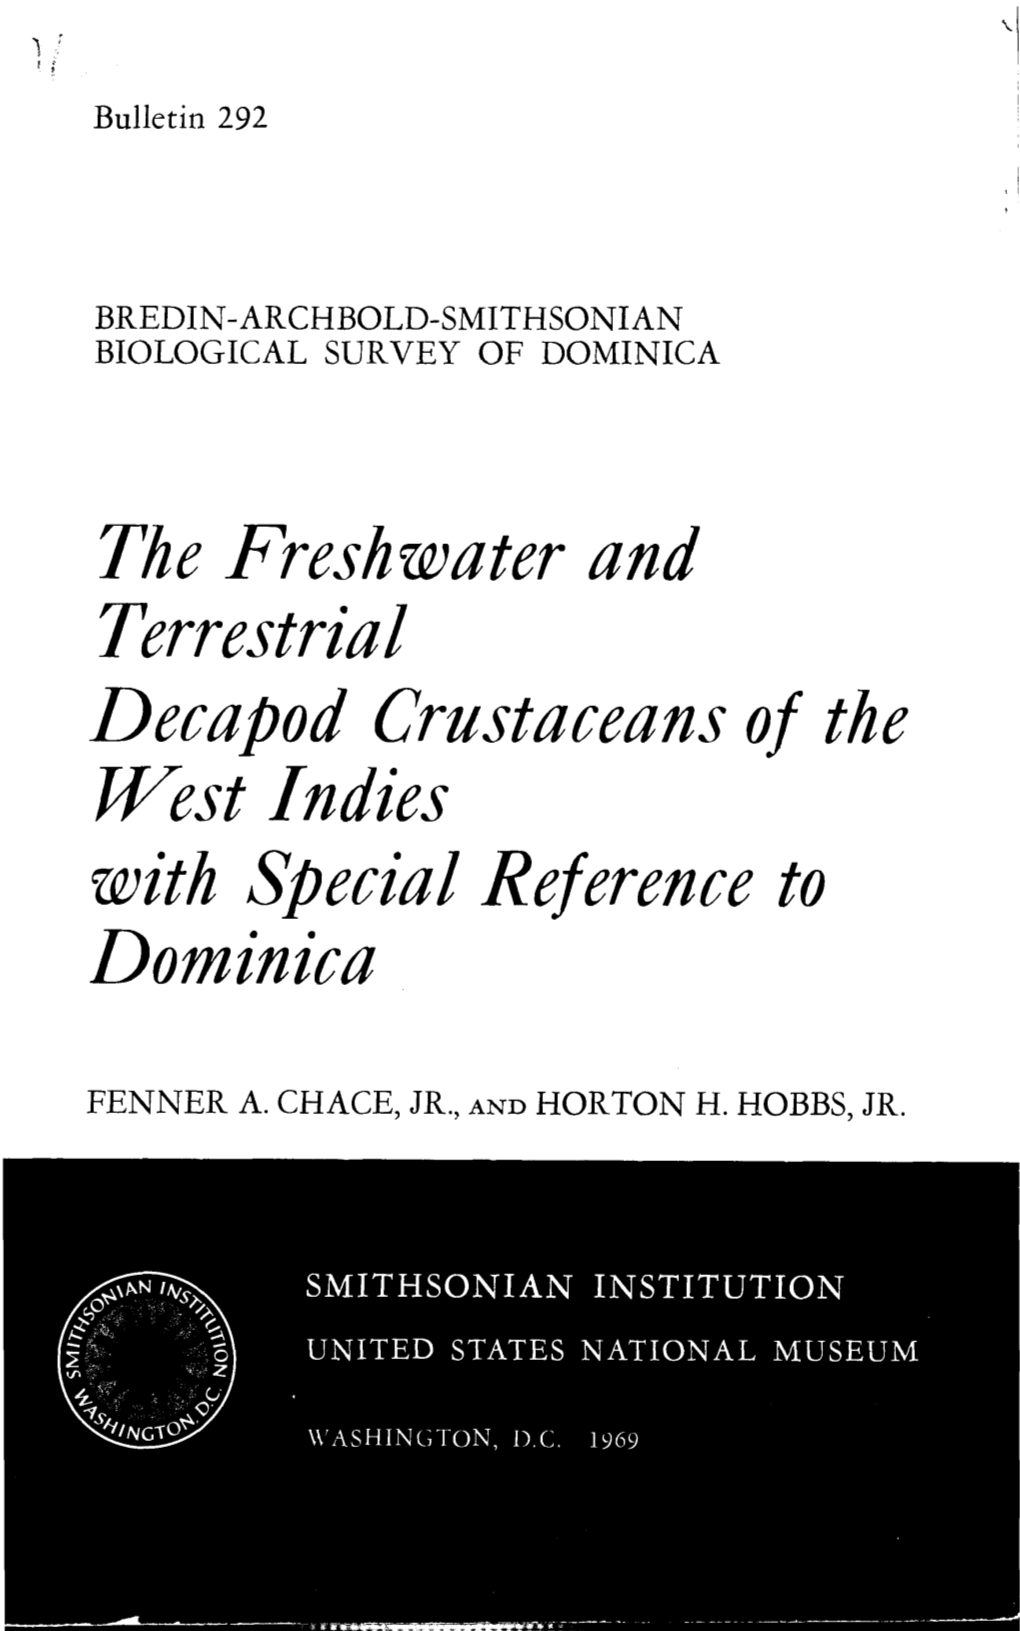 The Freshwater and Terrestrial Decapod Crustaceans of the West Indies with Special Reference to Dominica